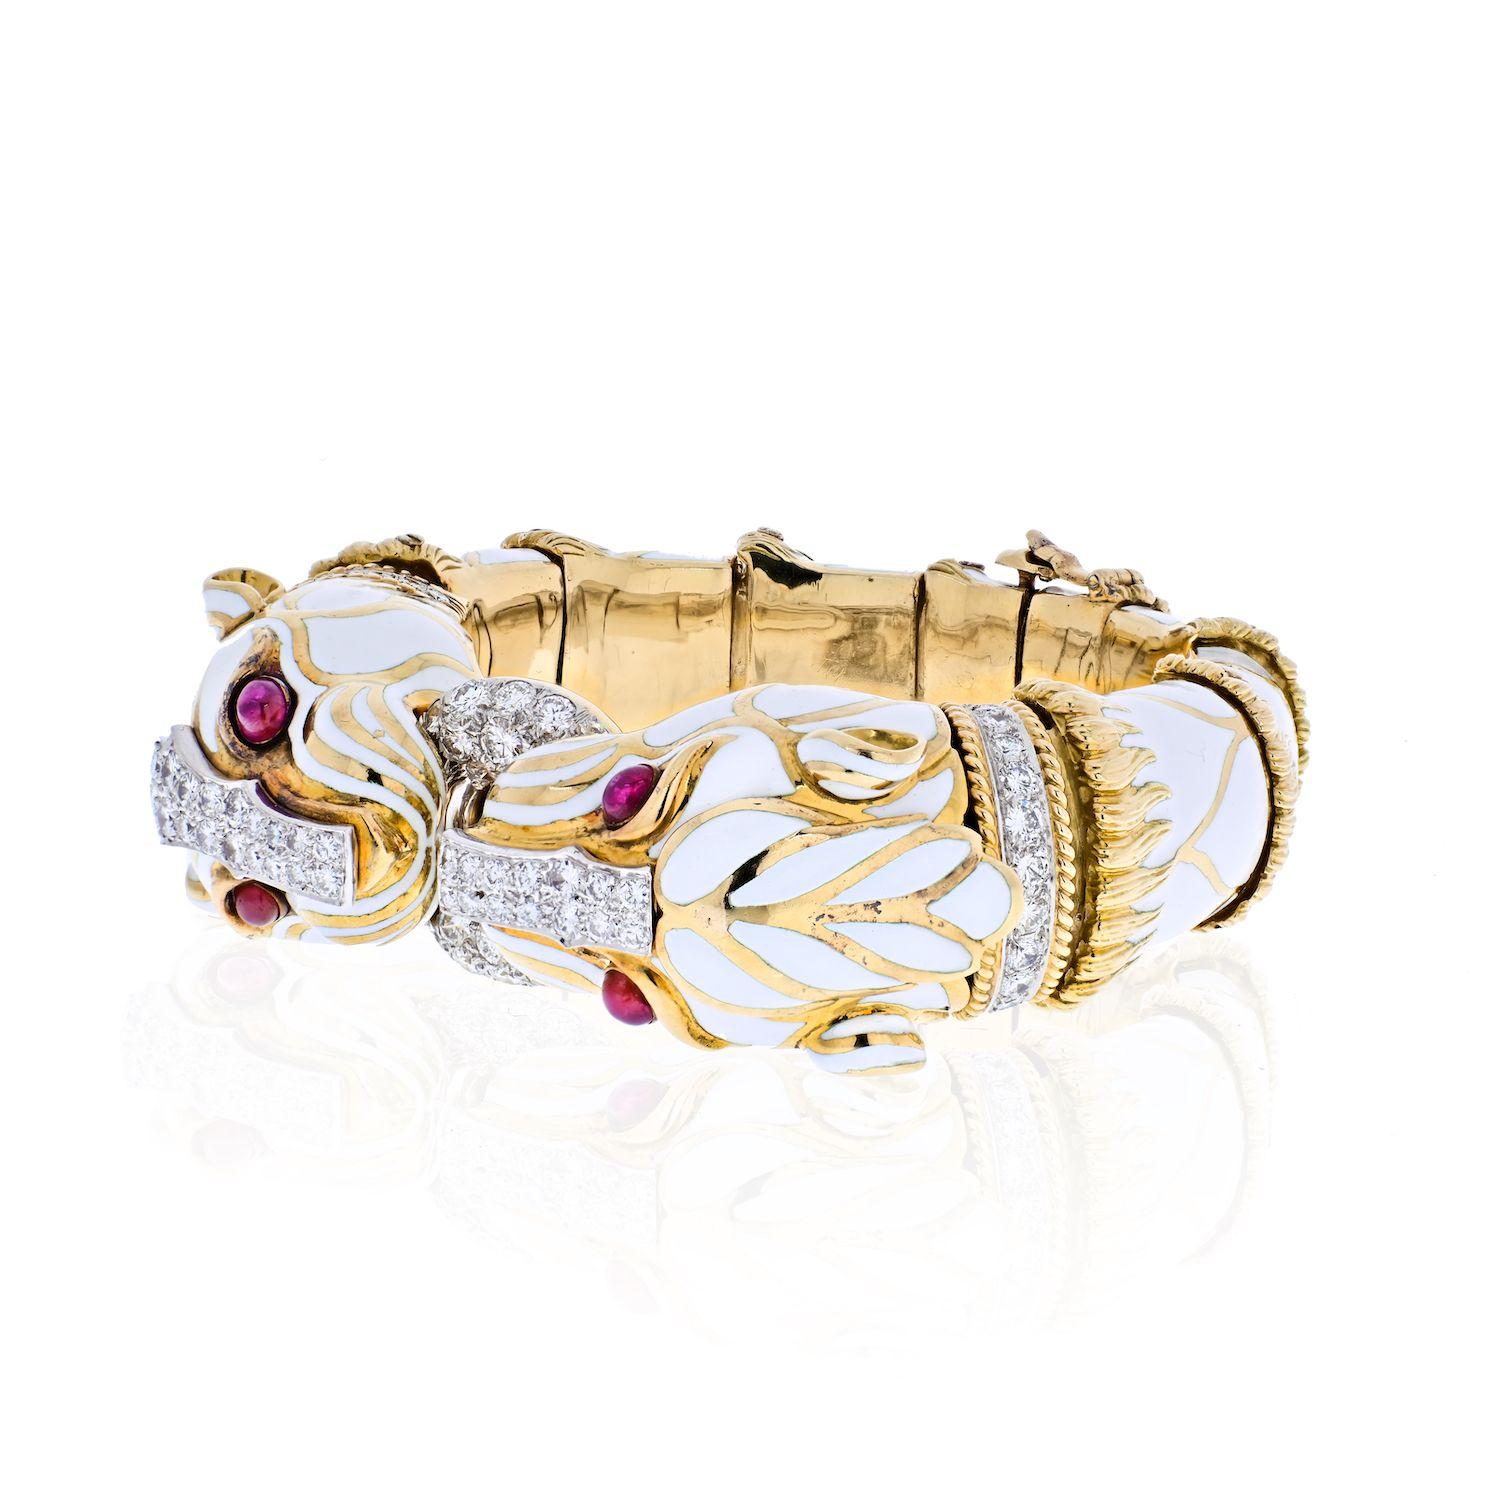 Designed as an articulated hinged bangle, the two opposing white enamel panthers, with bezel-set cabochon ruby eyes and a circular-cut diamond nose and collar, holding a circular-cut diamond hoop in their teeth, their white enamel bodies decorated